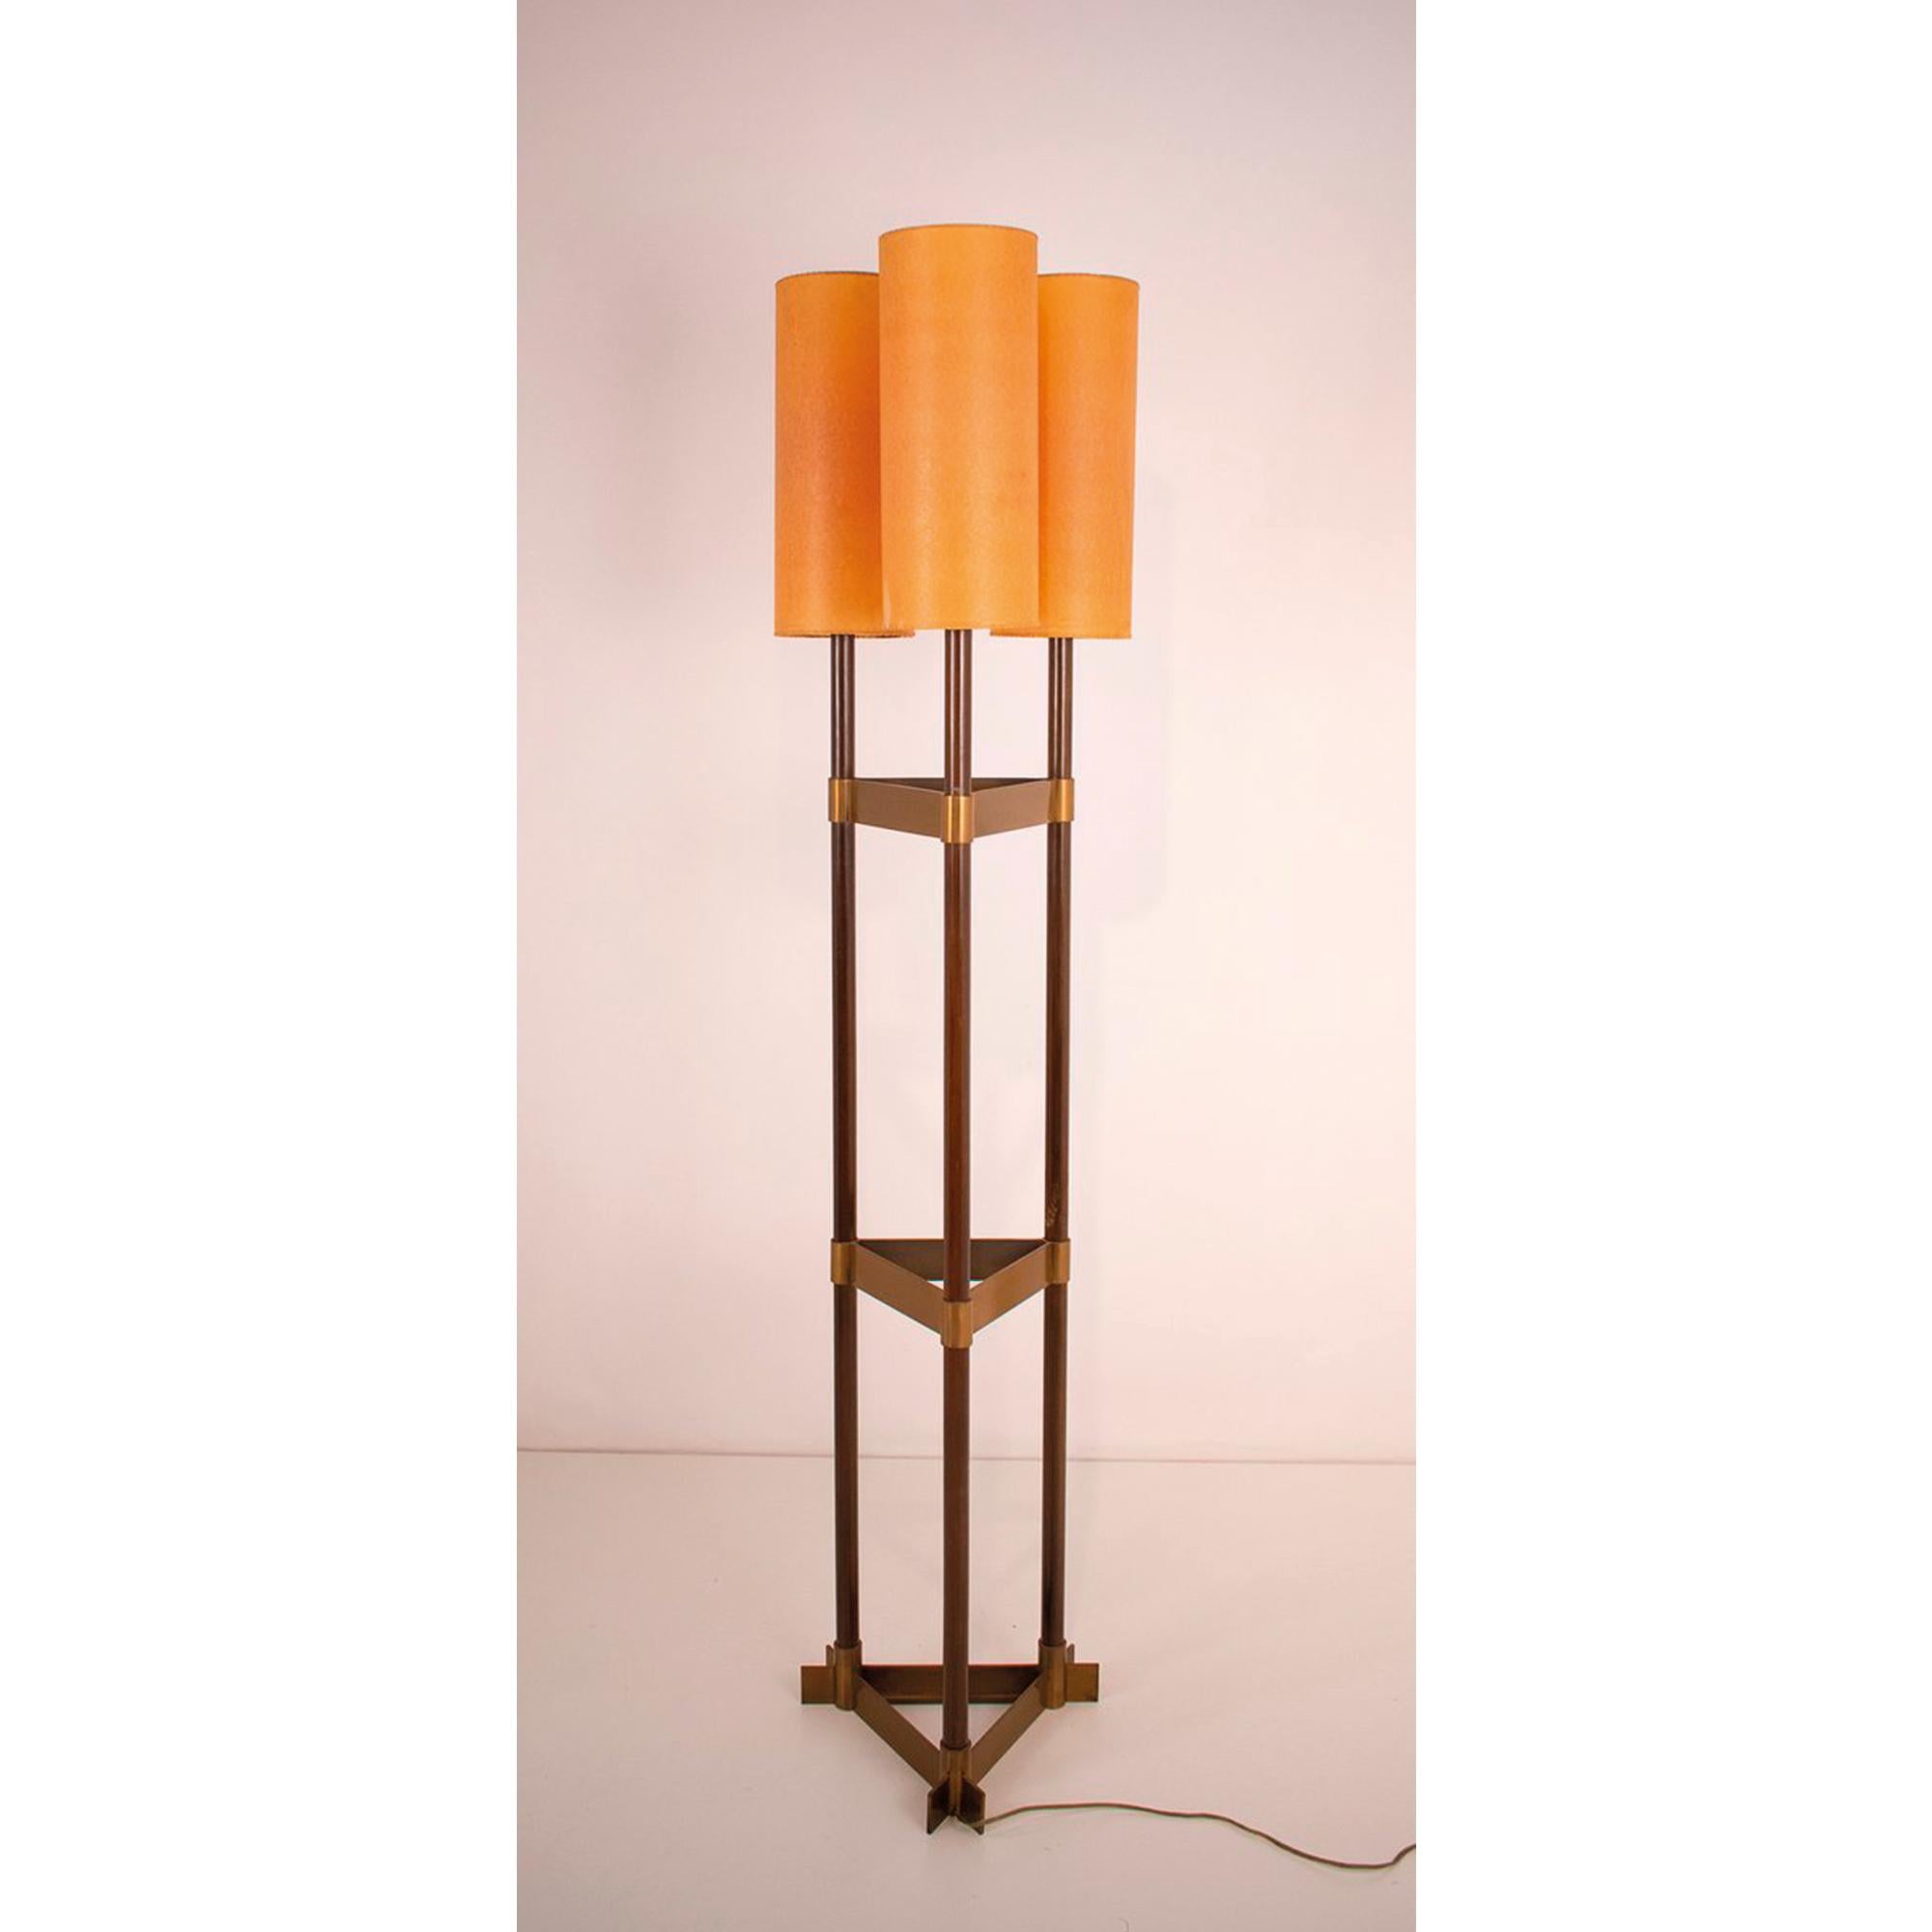 A brilliant design by Jordi Vilanova. In a refined and futuristic aesthetic, the designer created a timeless piece in 1960. Elegant and at the same time complex with its walnut and bronze structure which gives it real originality, this floor lamp